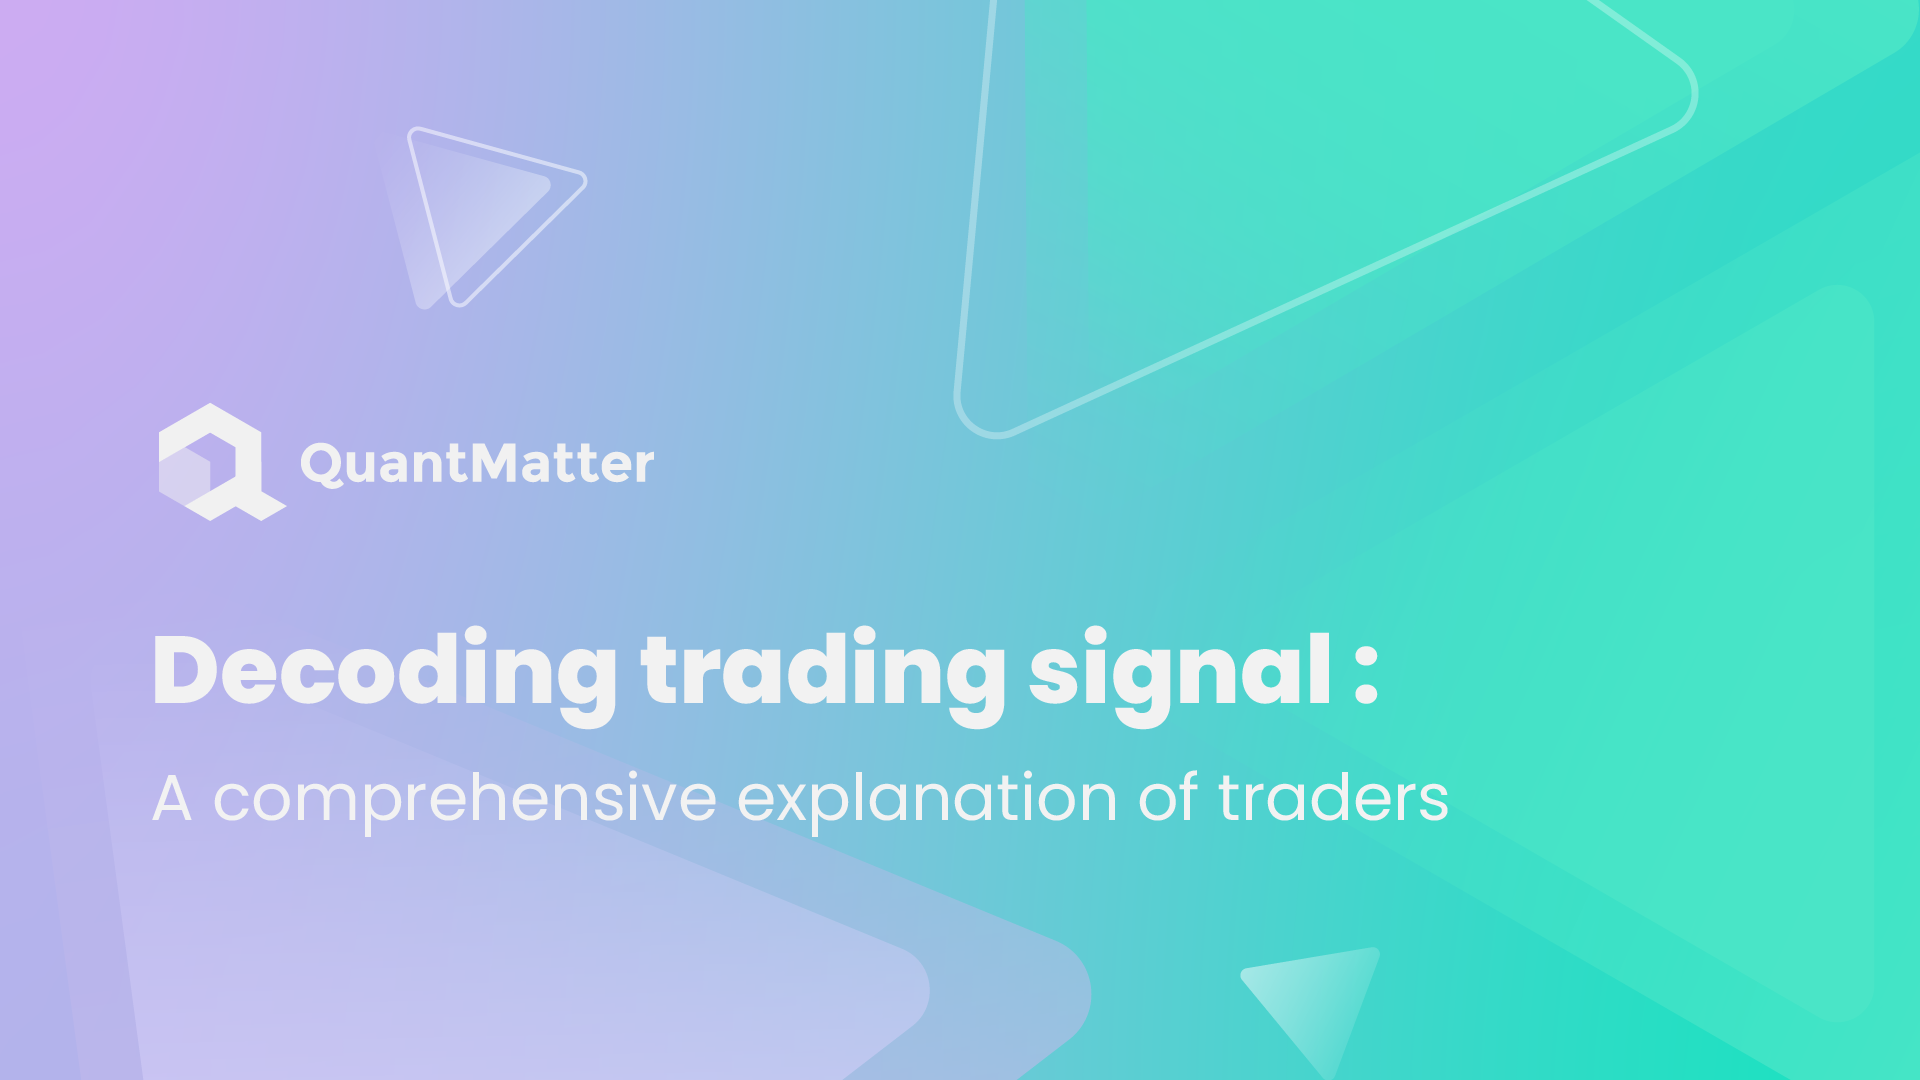 What Are Trading Signals?